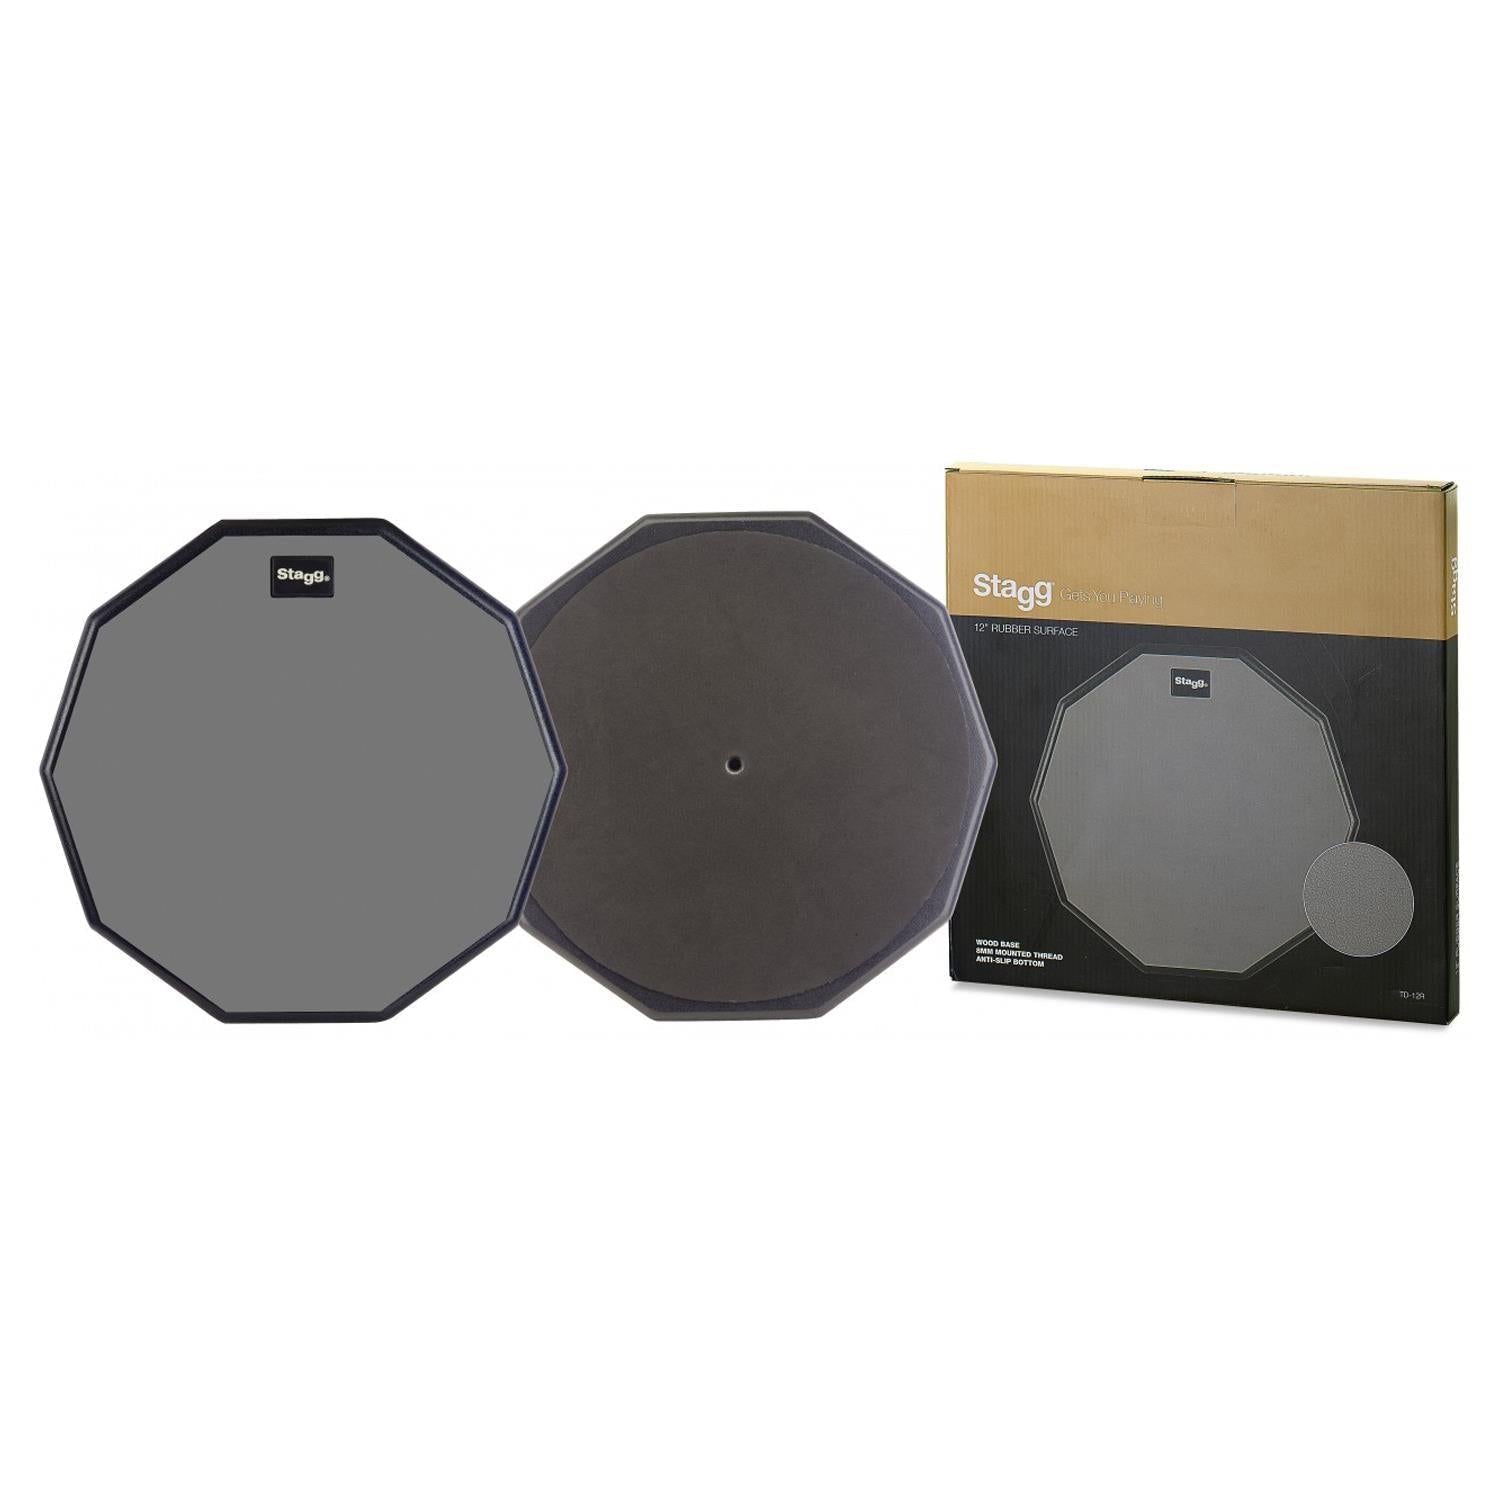 Stagg TD-12R 12" Practice Drum Pad - DY Pro Audio